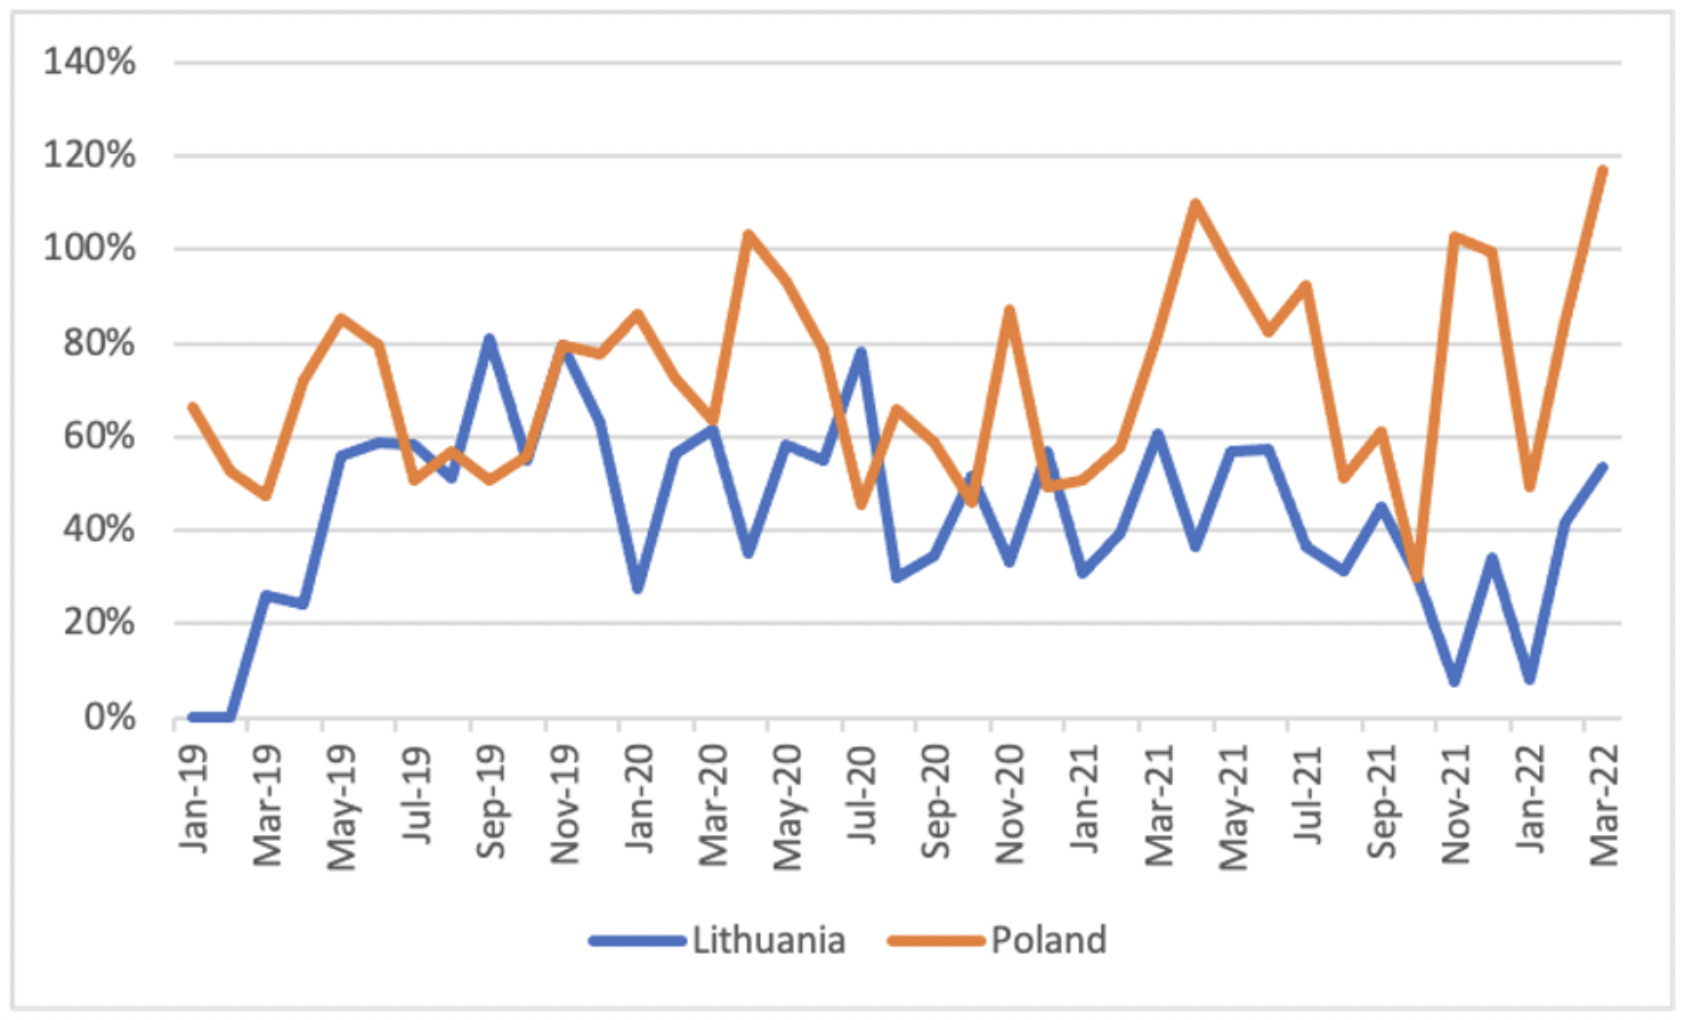 This graph compares Lithuania and Poland's LNG import terminals capacity utilization.